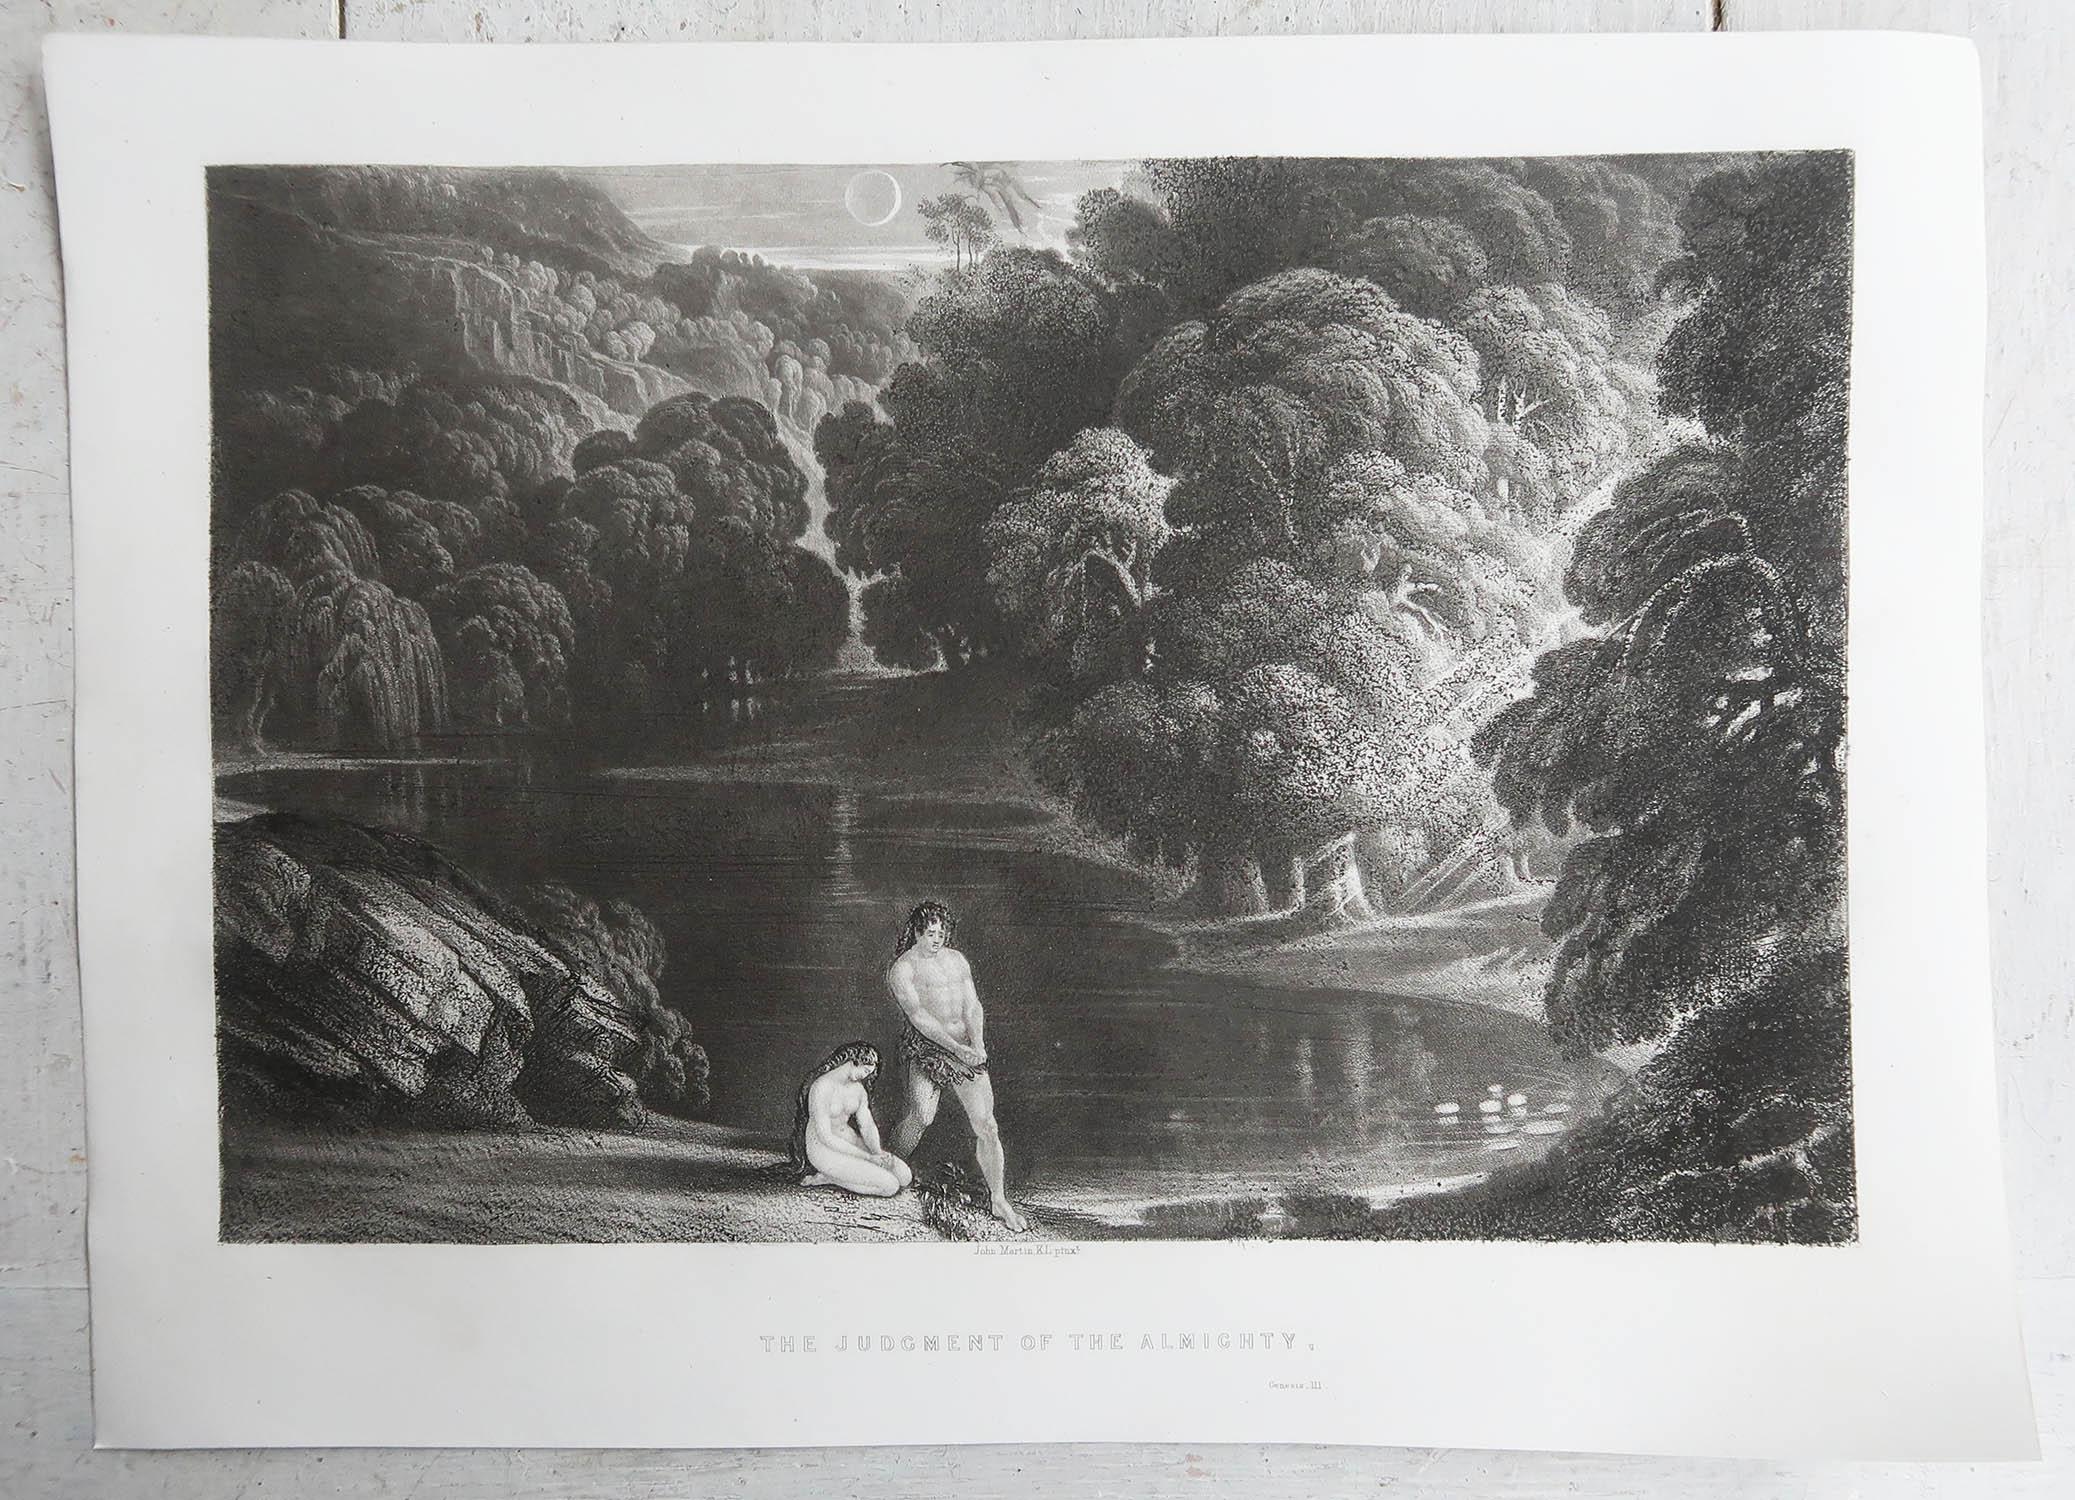 Romantic Mezzotint by John Martin, the Judgment of the Almighty, Sangster, circa 1850